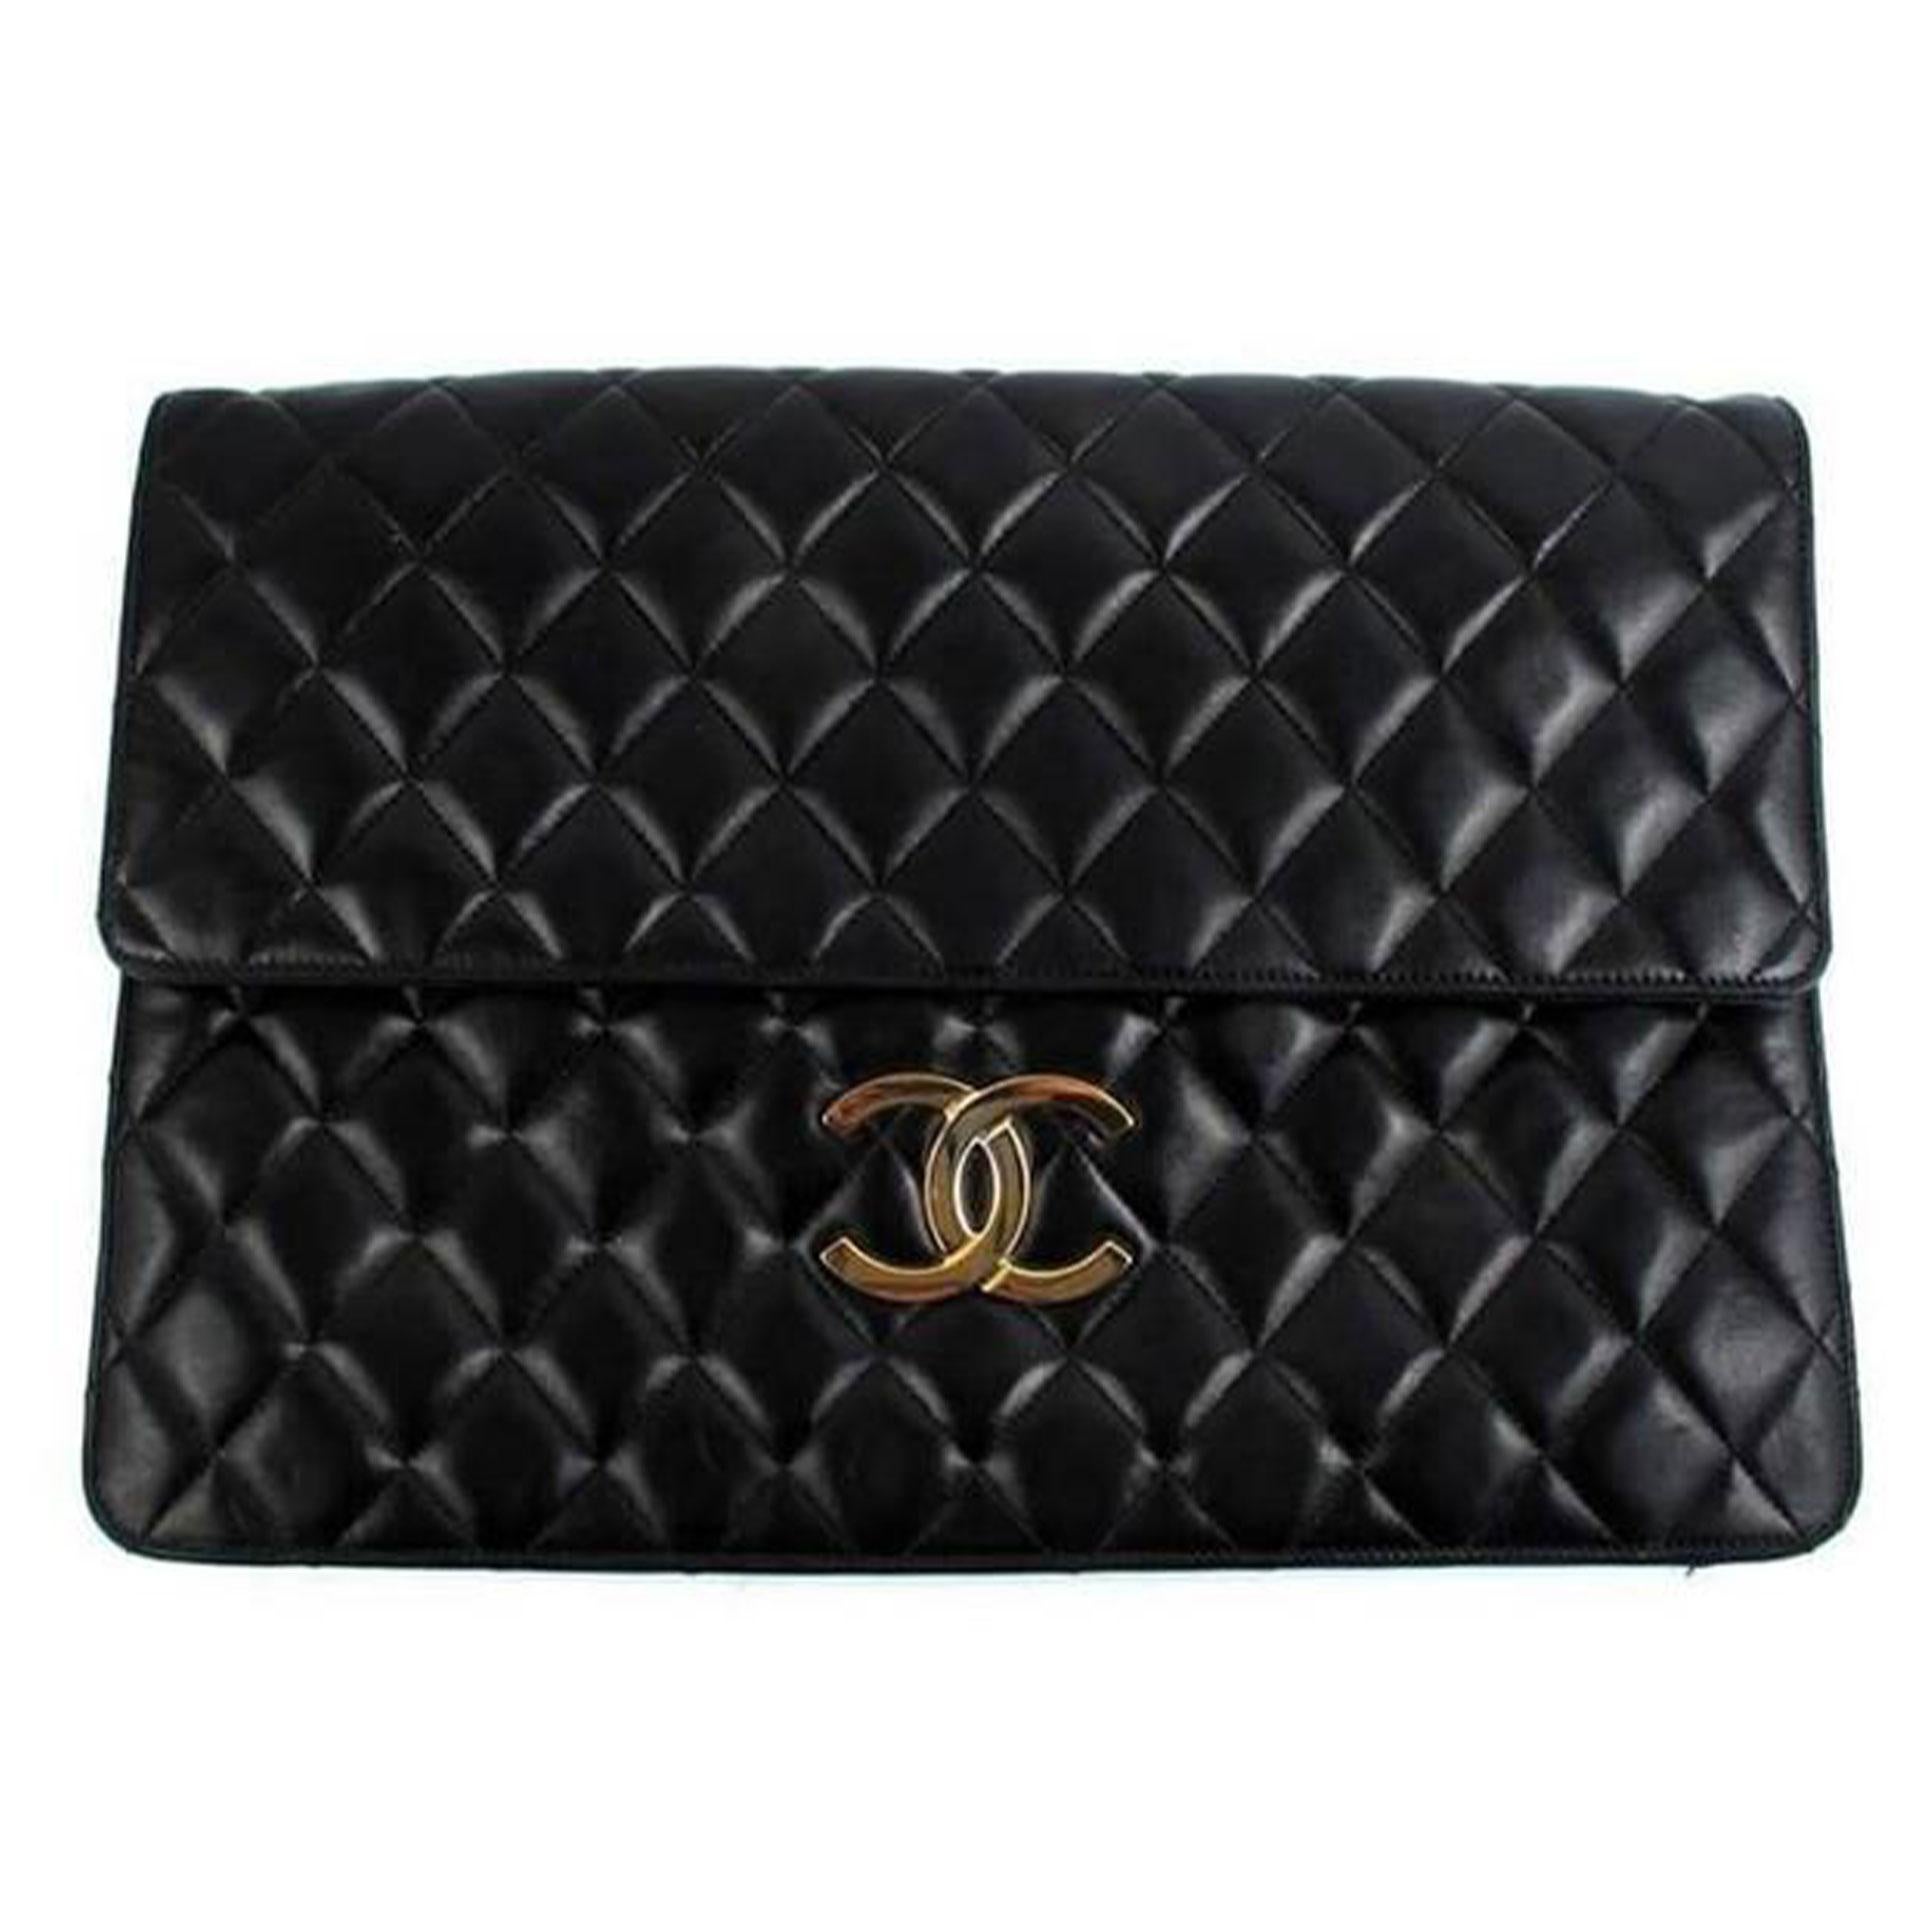 Chanel 1990 Rare Jumbo Maxi XL Vintage Classic Flap Giant Clutch Briefcase For Sale 3